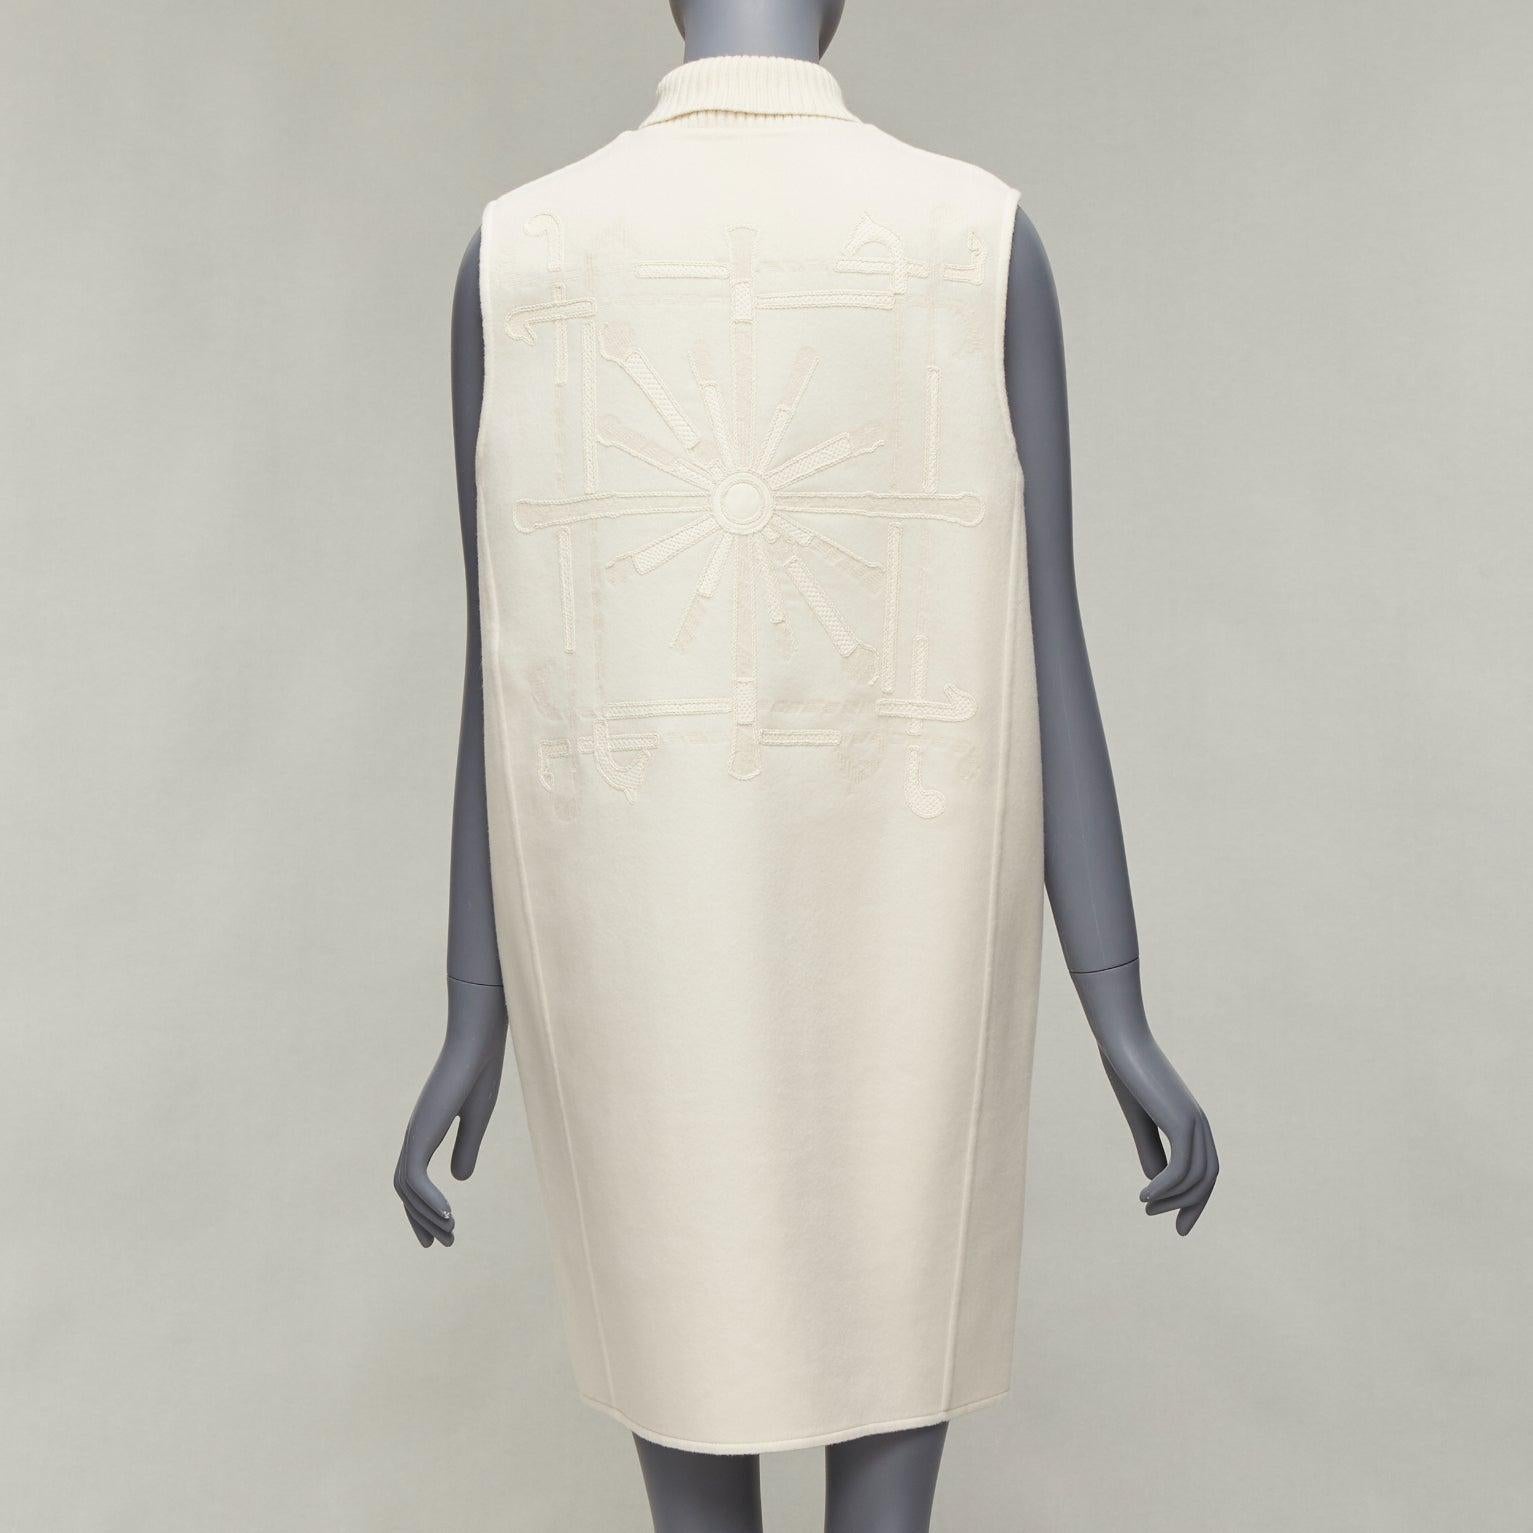 HERMES 100% cashmere cream applique back ribbed zip sleeveless coat FR34 XS For Sale 2